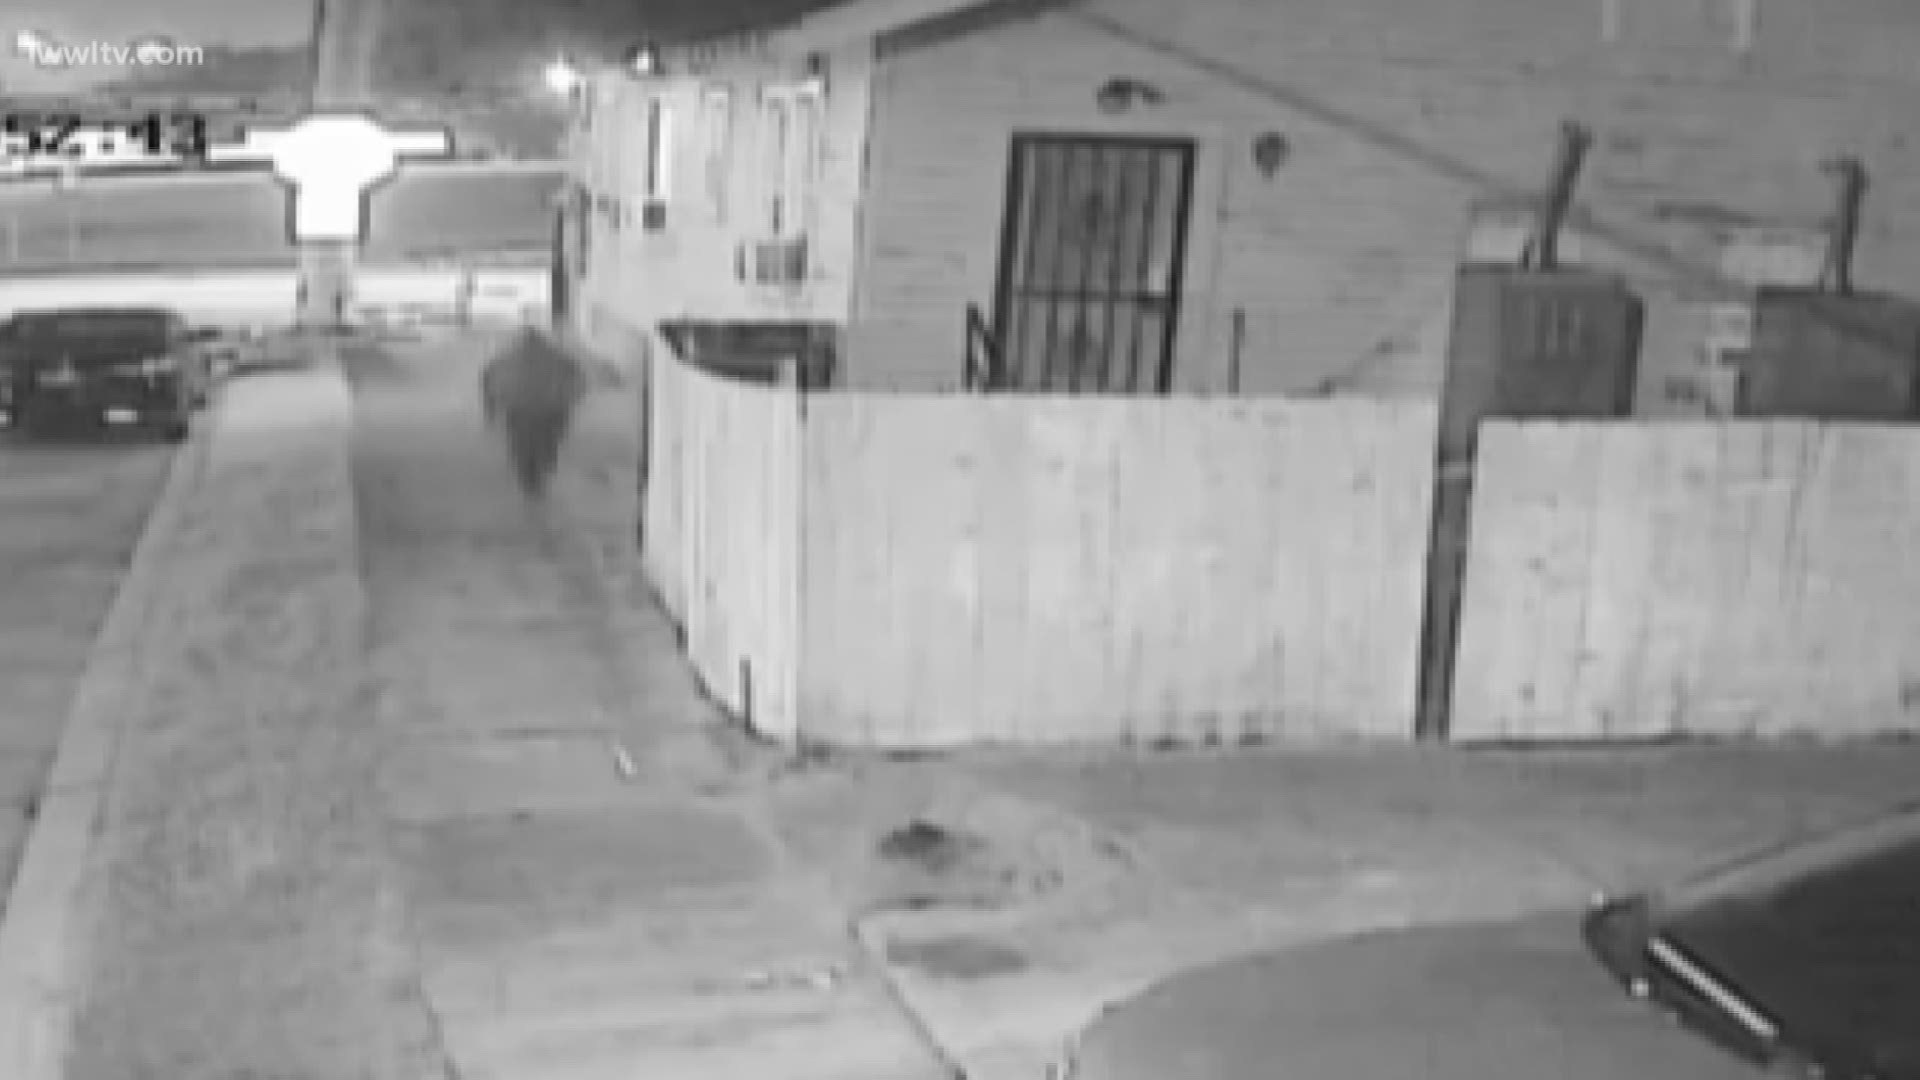 Police released surveillance footage showing the man who opened fire on the house the two cousins lived in.